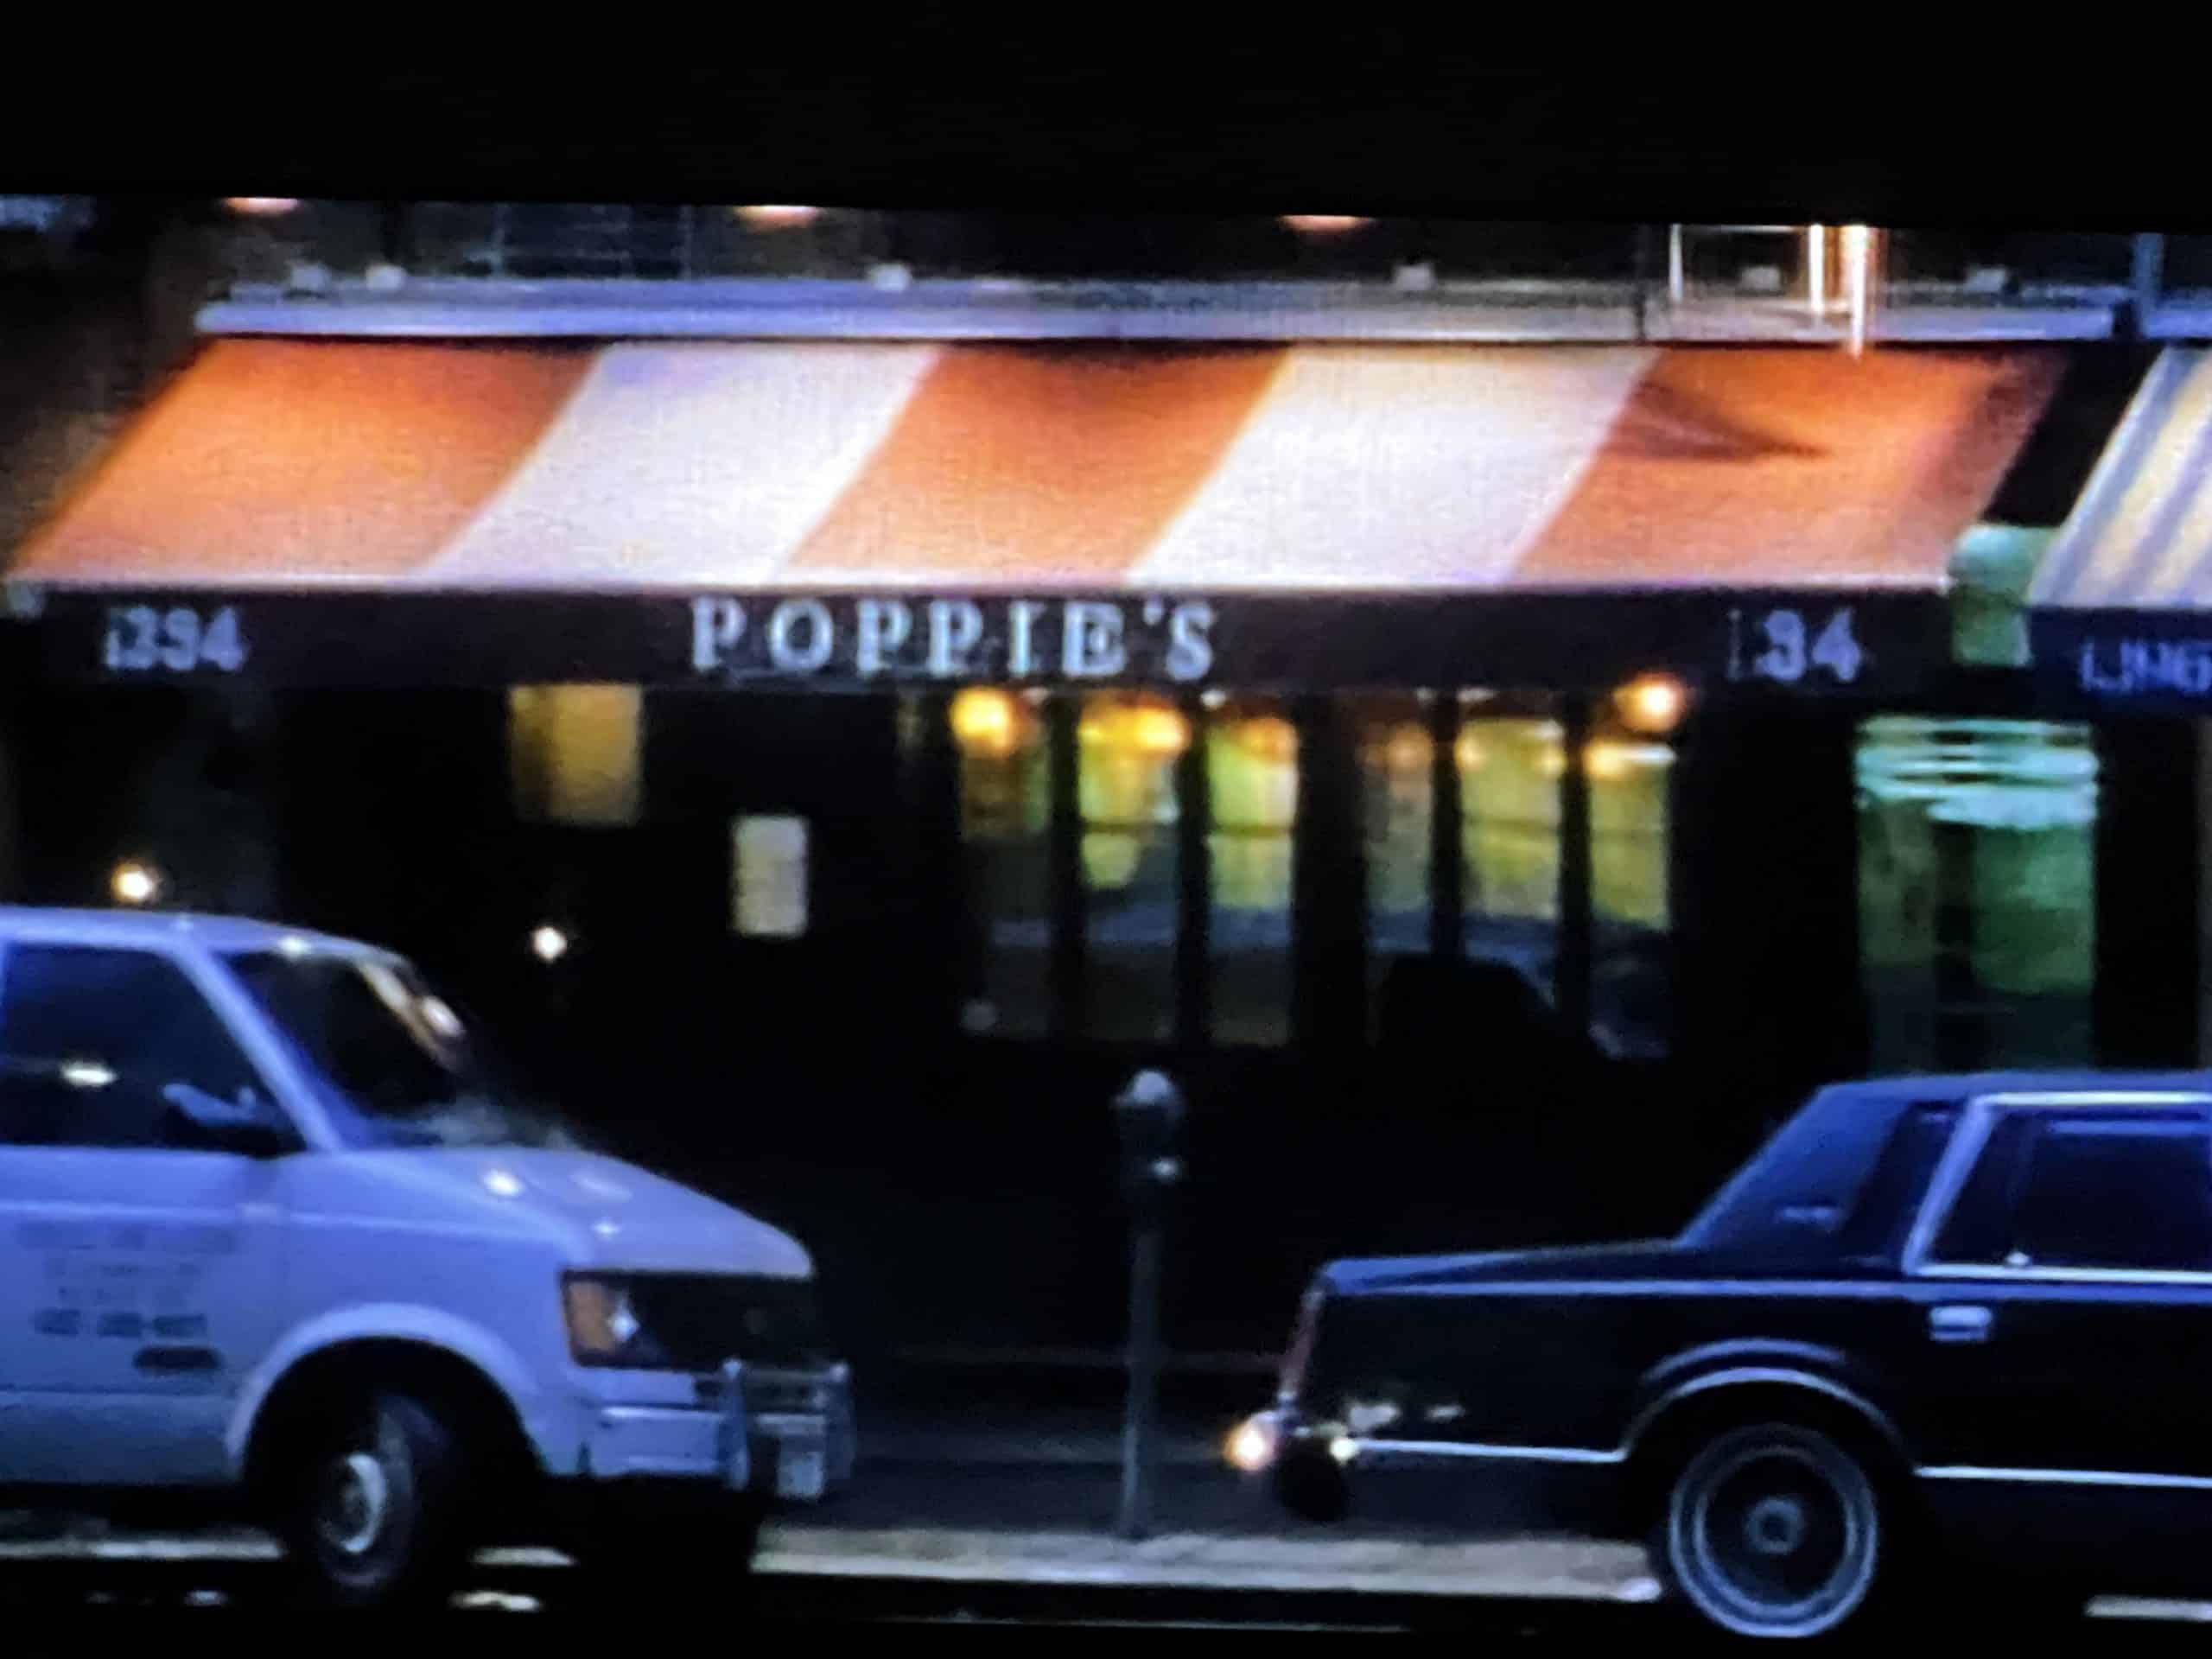 The fictional restaurant Poppie's was located at 1394 Third Avenue 